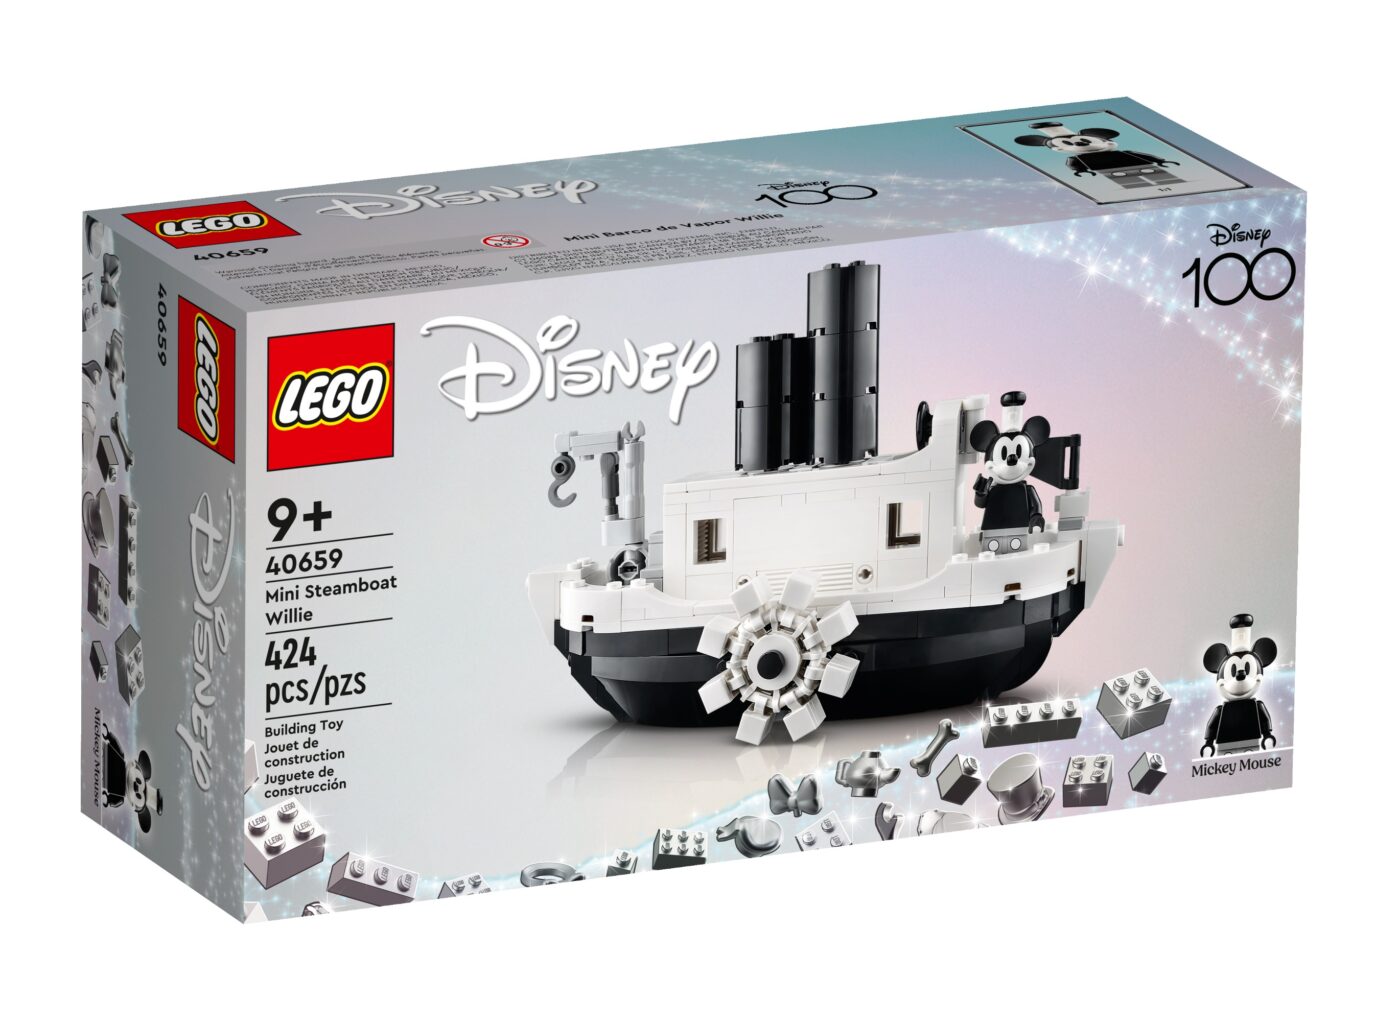 LEGO 40659 Mini Steamboat Willie GWP revealed to have mechanical functions!1